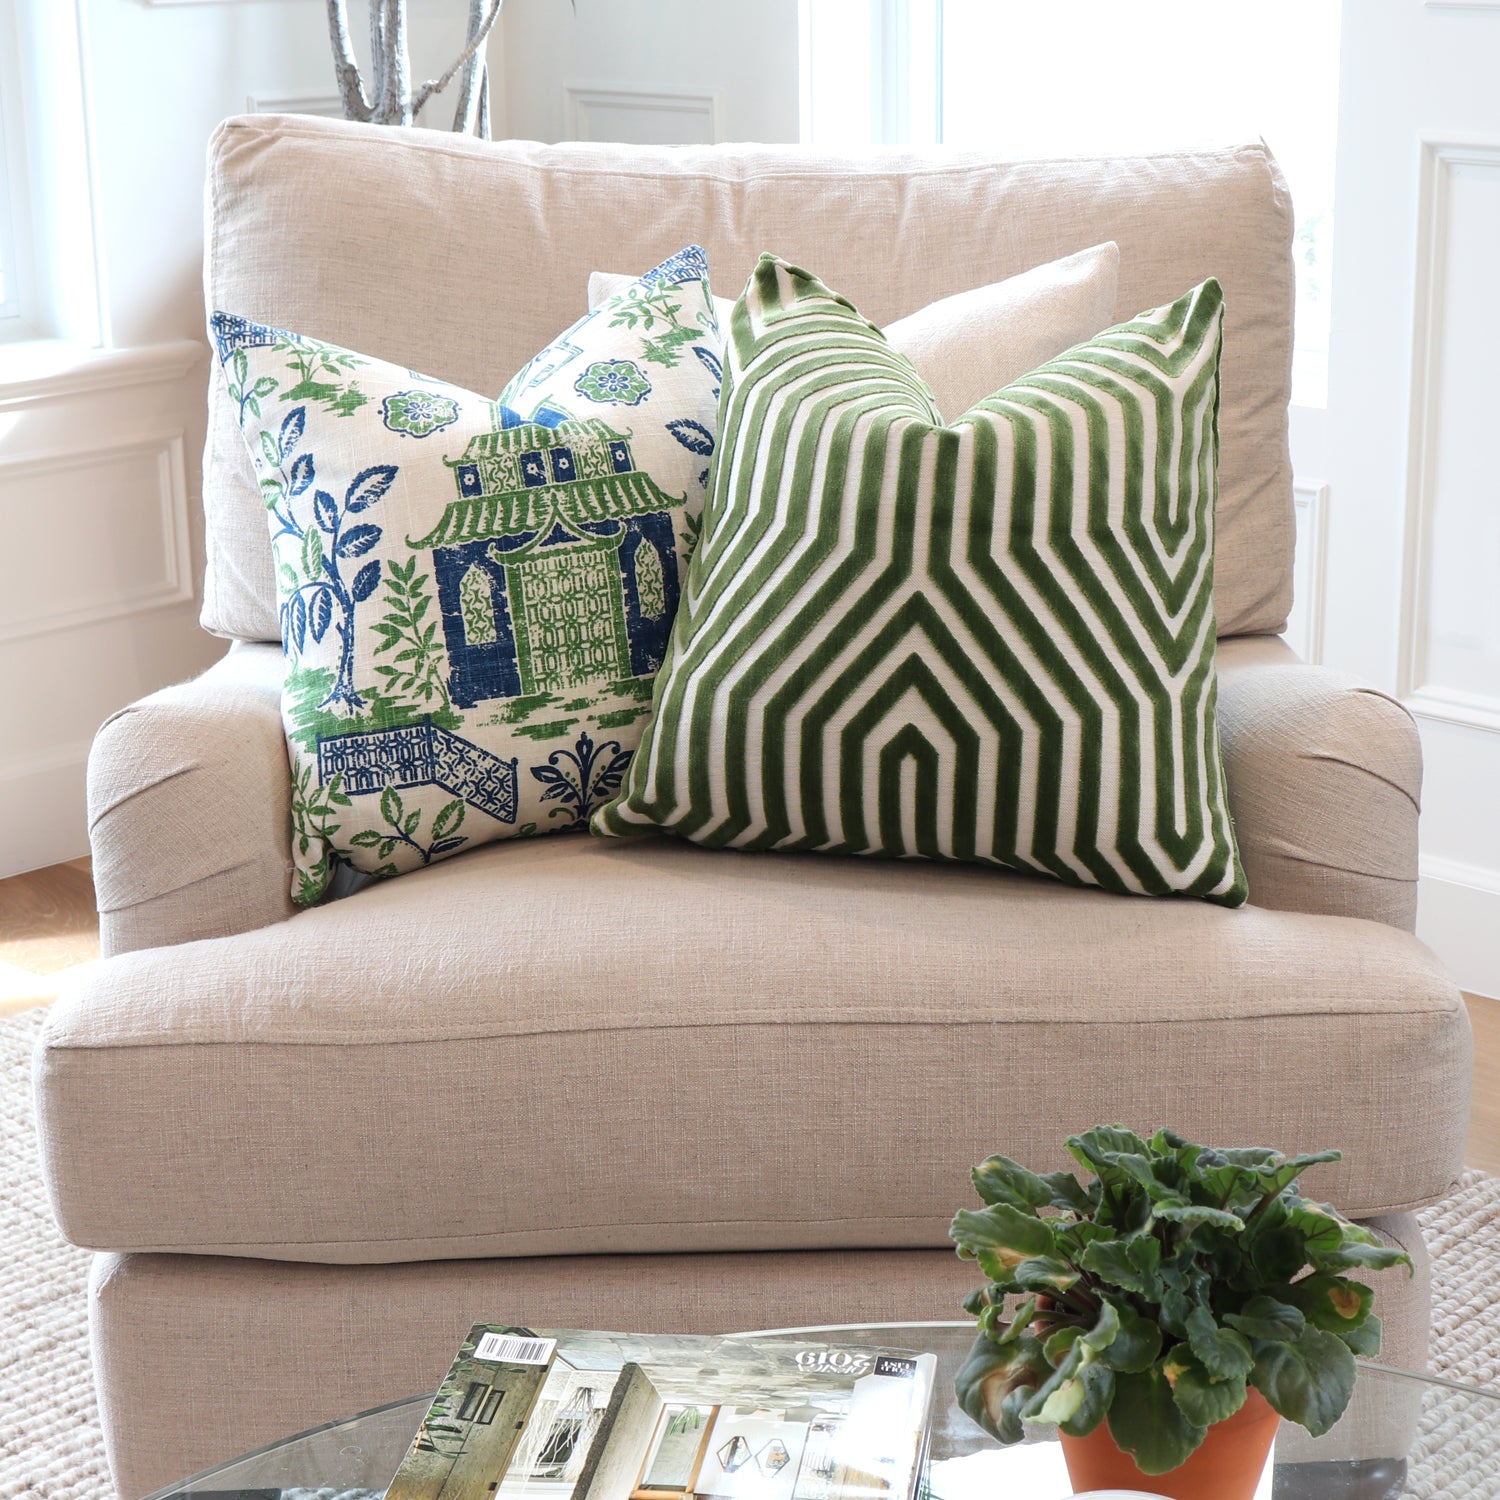 Decorative Pillow Size Guide for Sofas - Chloe & Olive